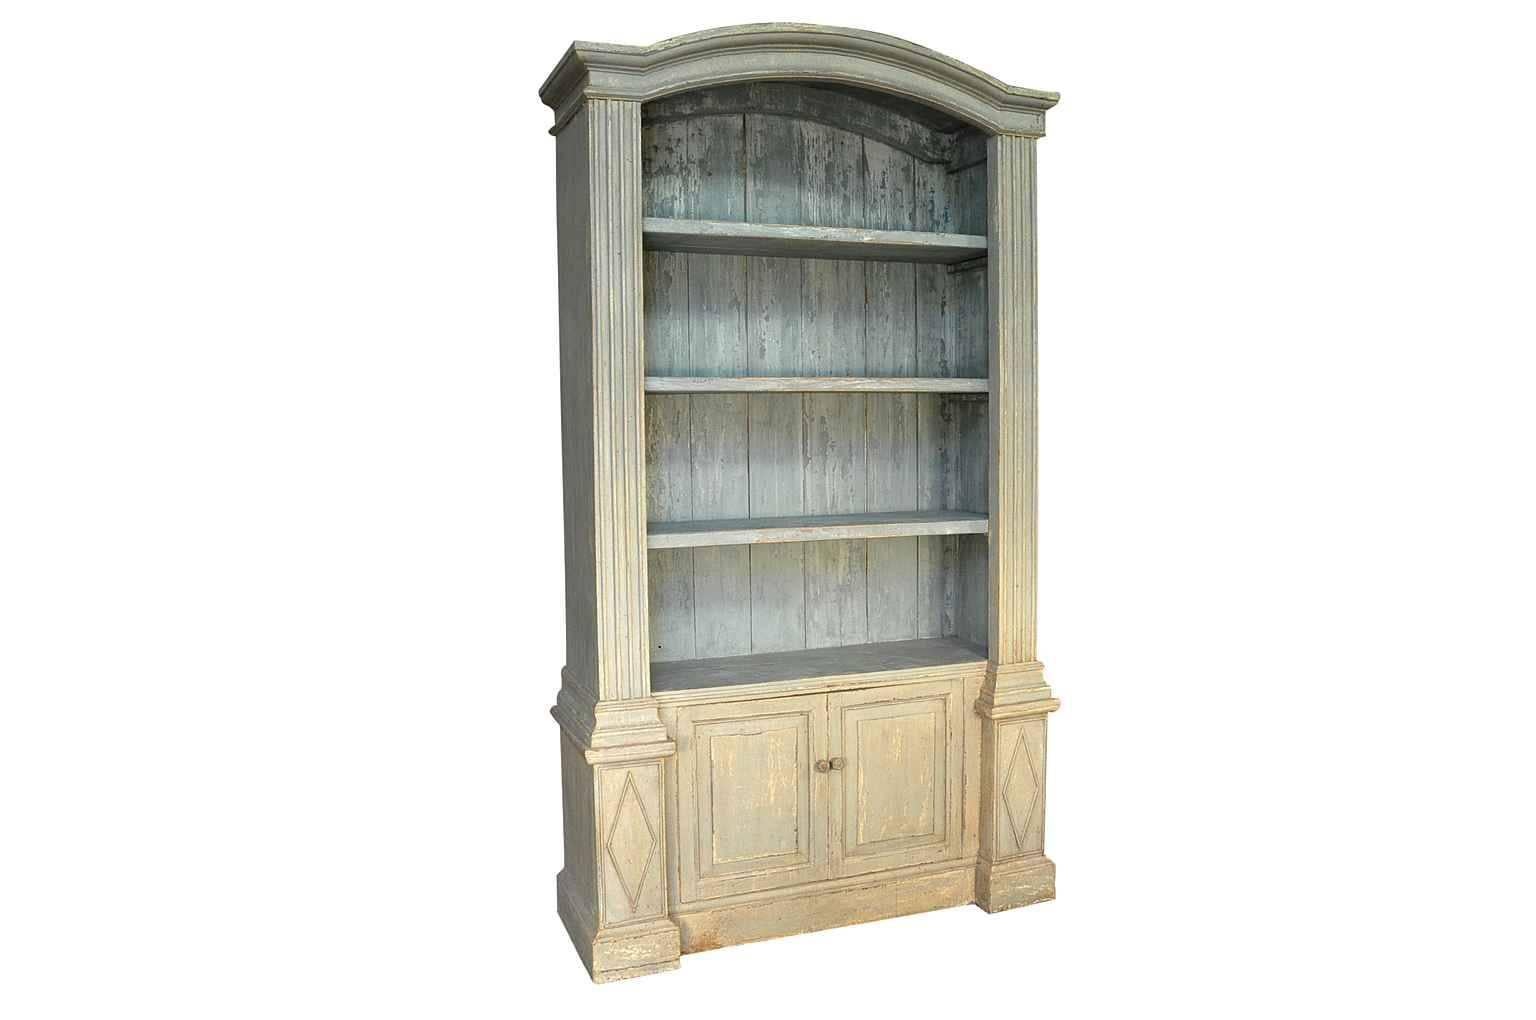 Spanish Outstanding Pair Of Bookcases In Painted Wood